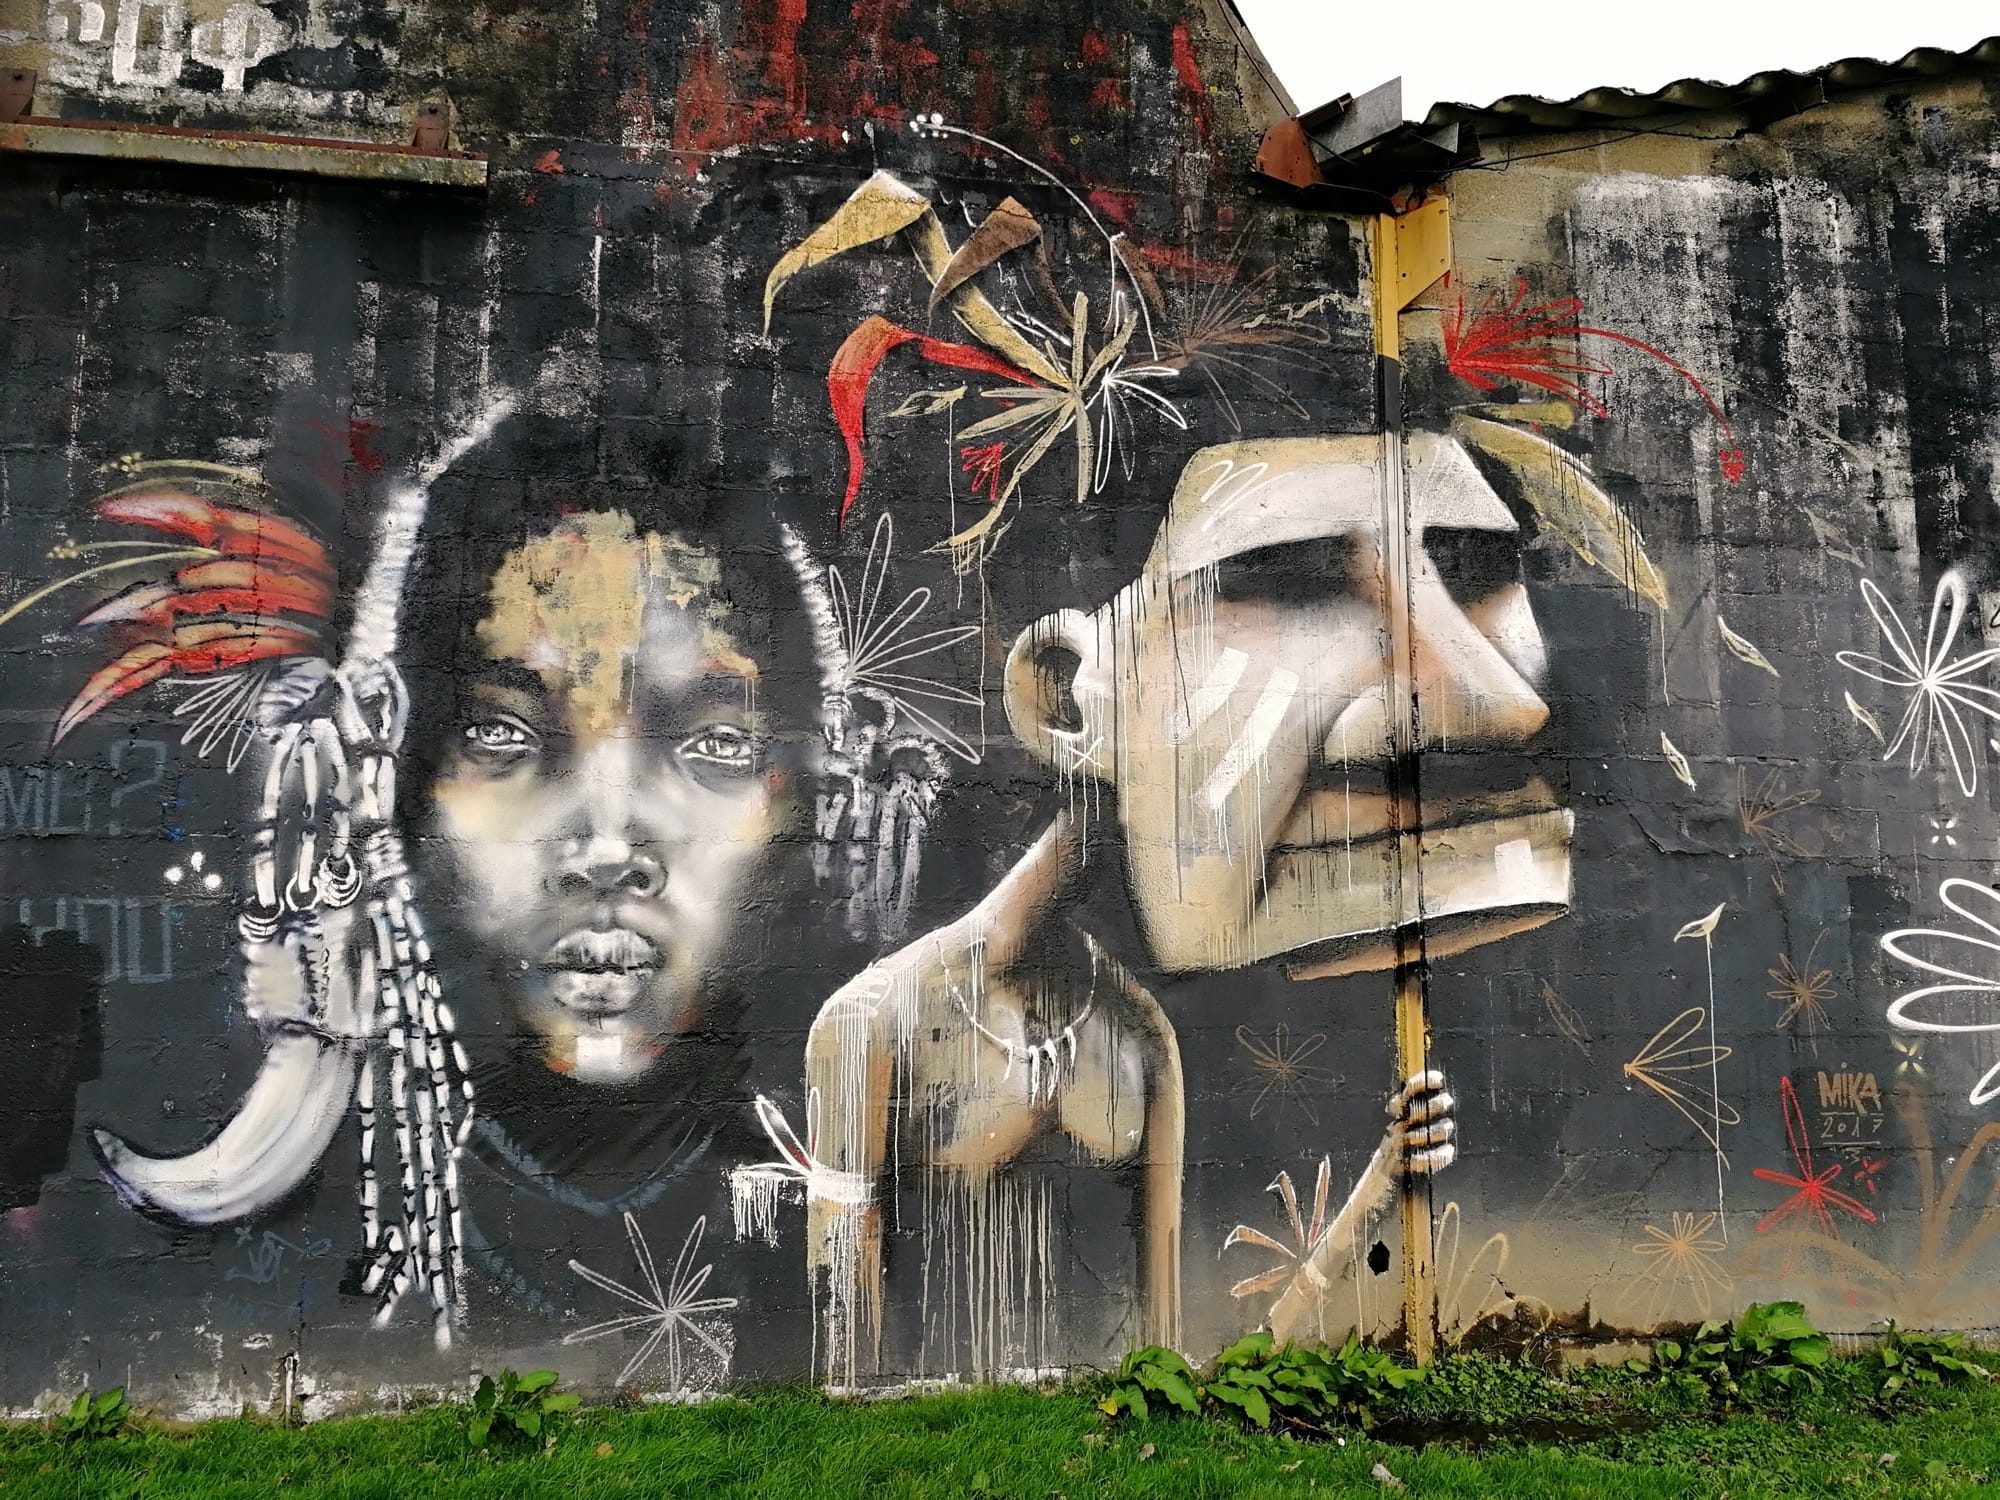 Graffiti 1207  by the artist Jef captured by Rabot in Redon France